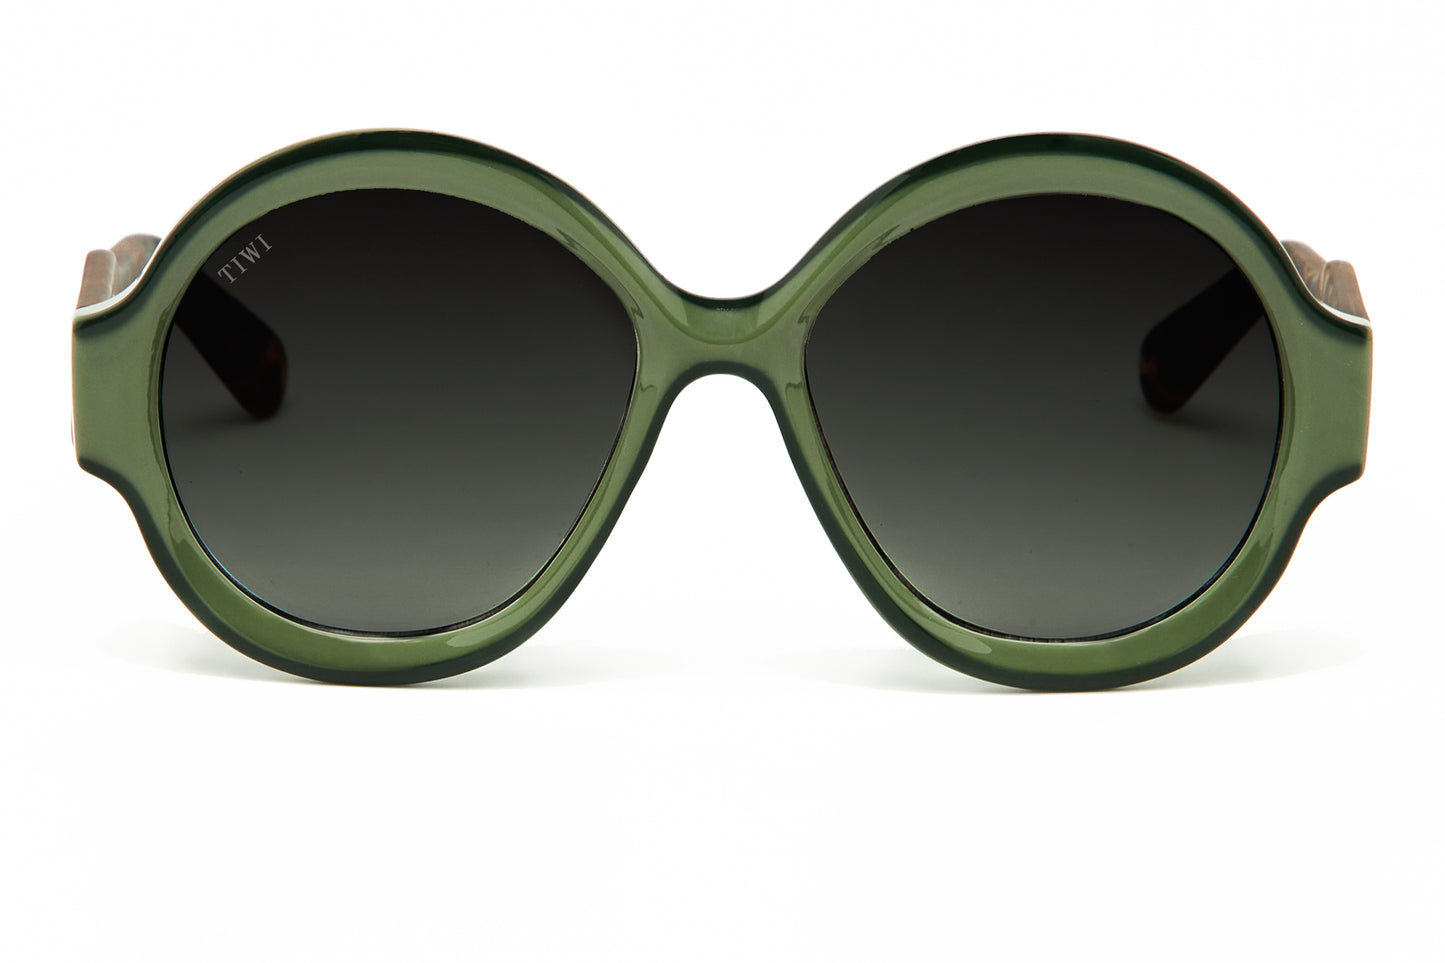 GAMBETTA Sunglasses Available in more colors Shiny Green/Dark/Light Tortoise Temples  